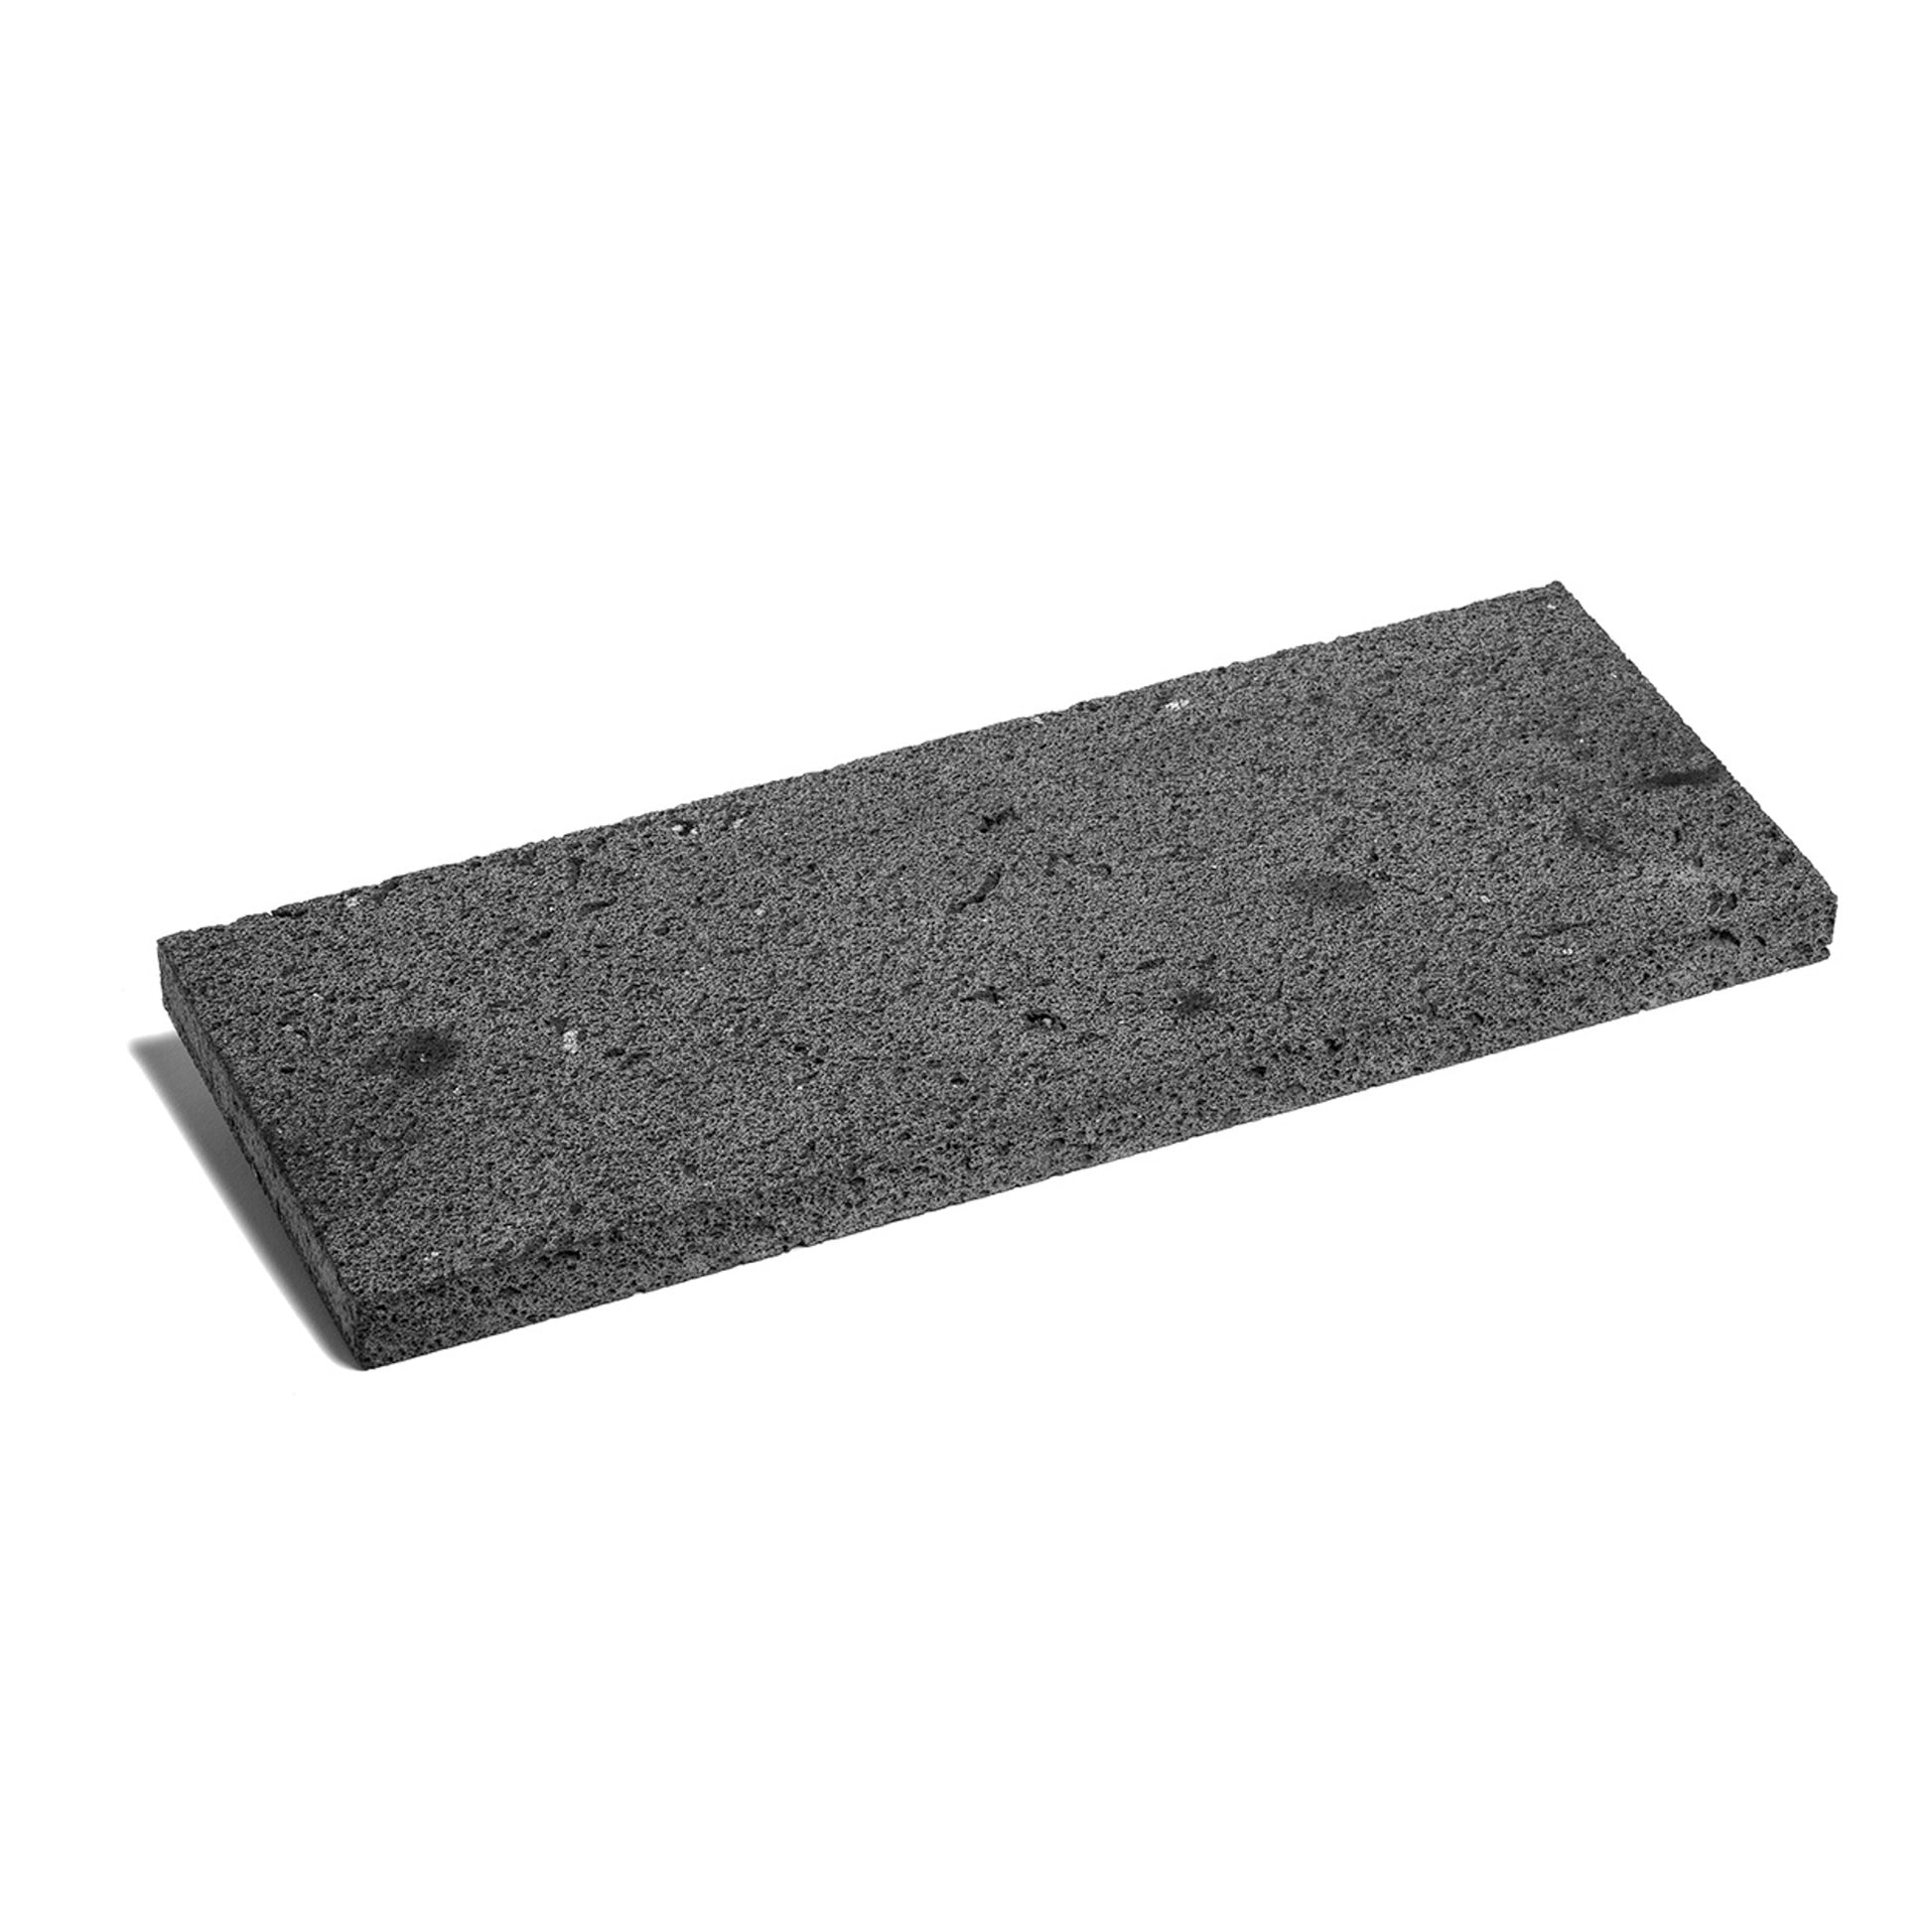 BASALT GRAY - By Price: Lowest to Highest